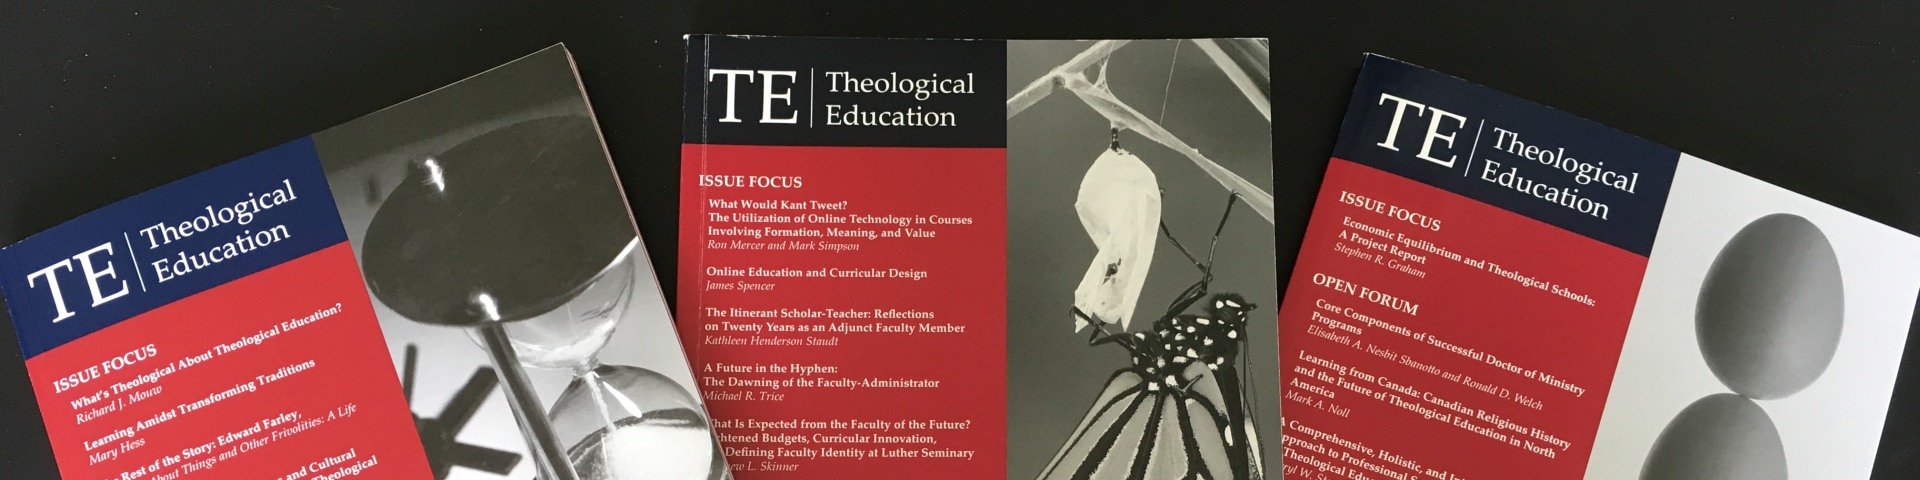 Theological Education Journal Archives